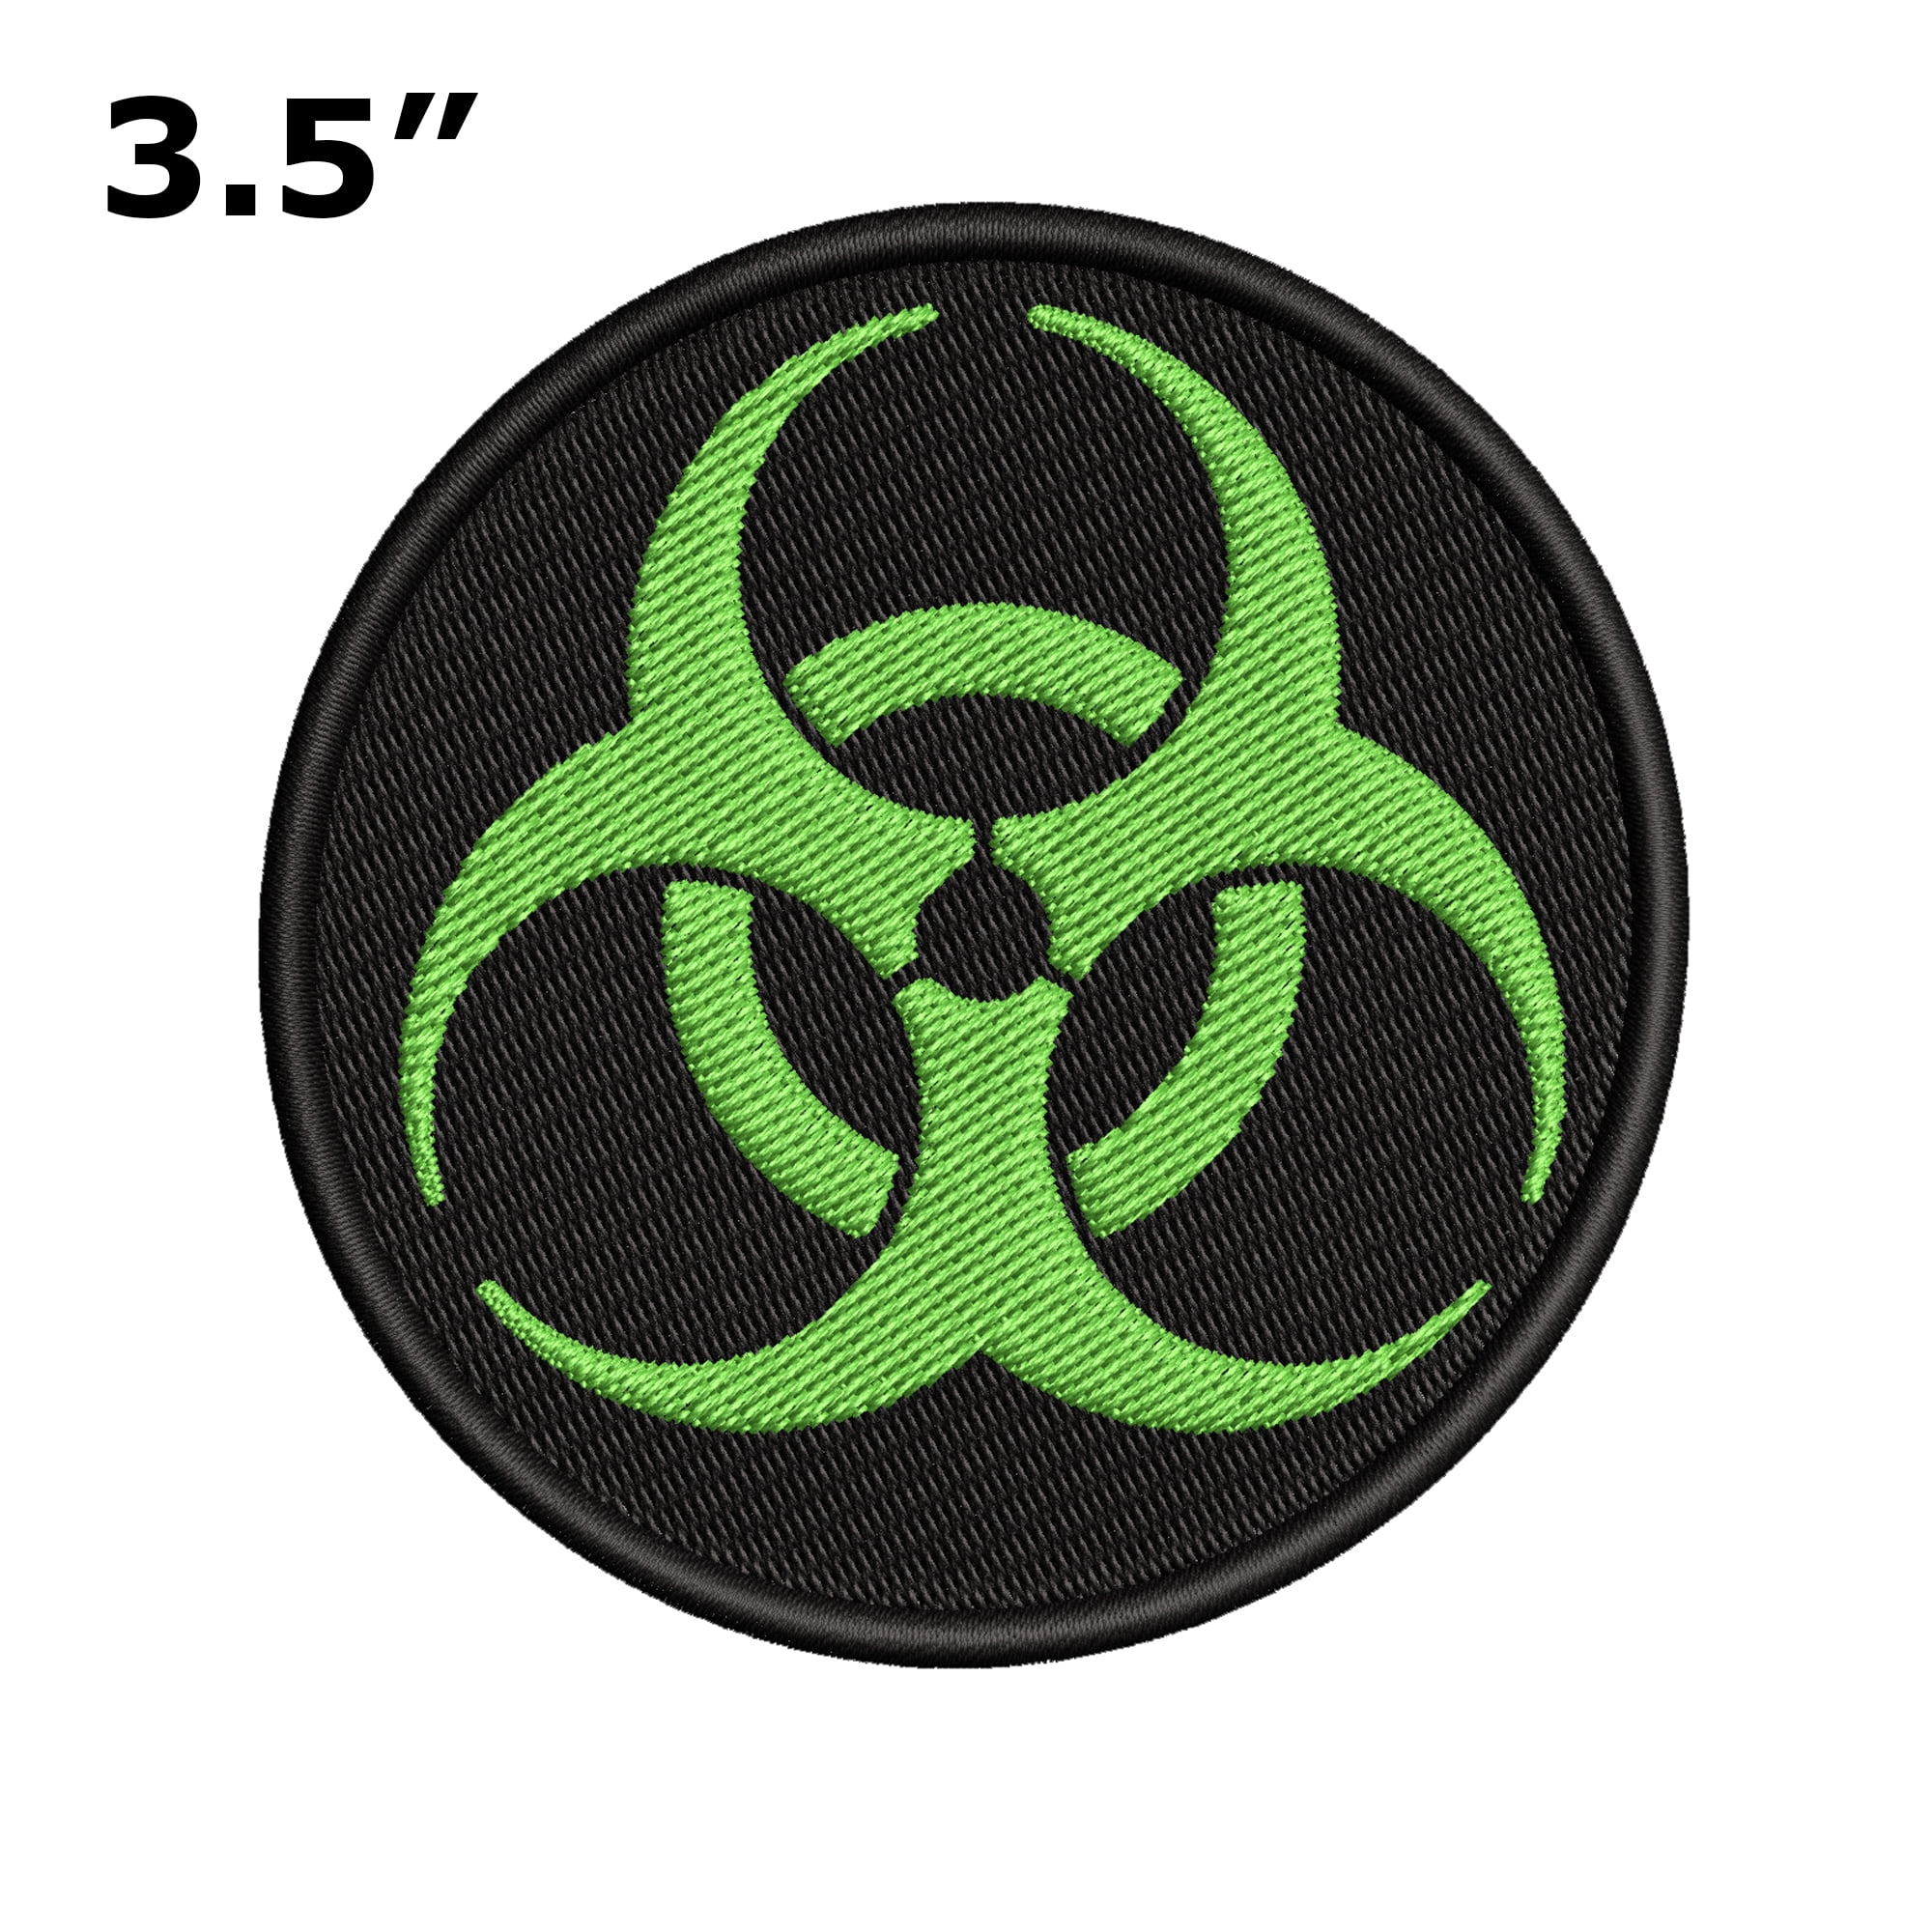 BIOHAZARD SYMBOL embroidered iron-on PATCH ZOMBIE GREEN new TOXIC WARNING DANGER 